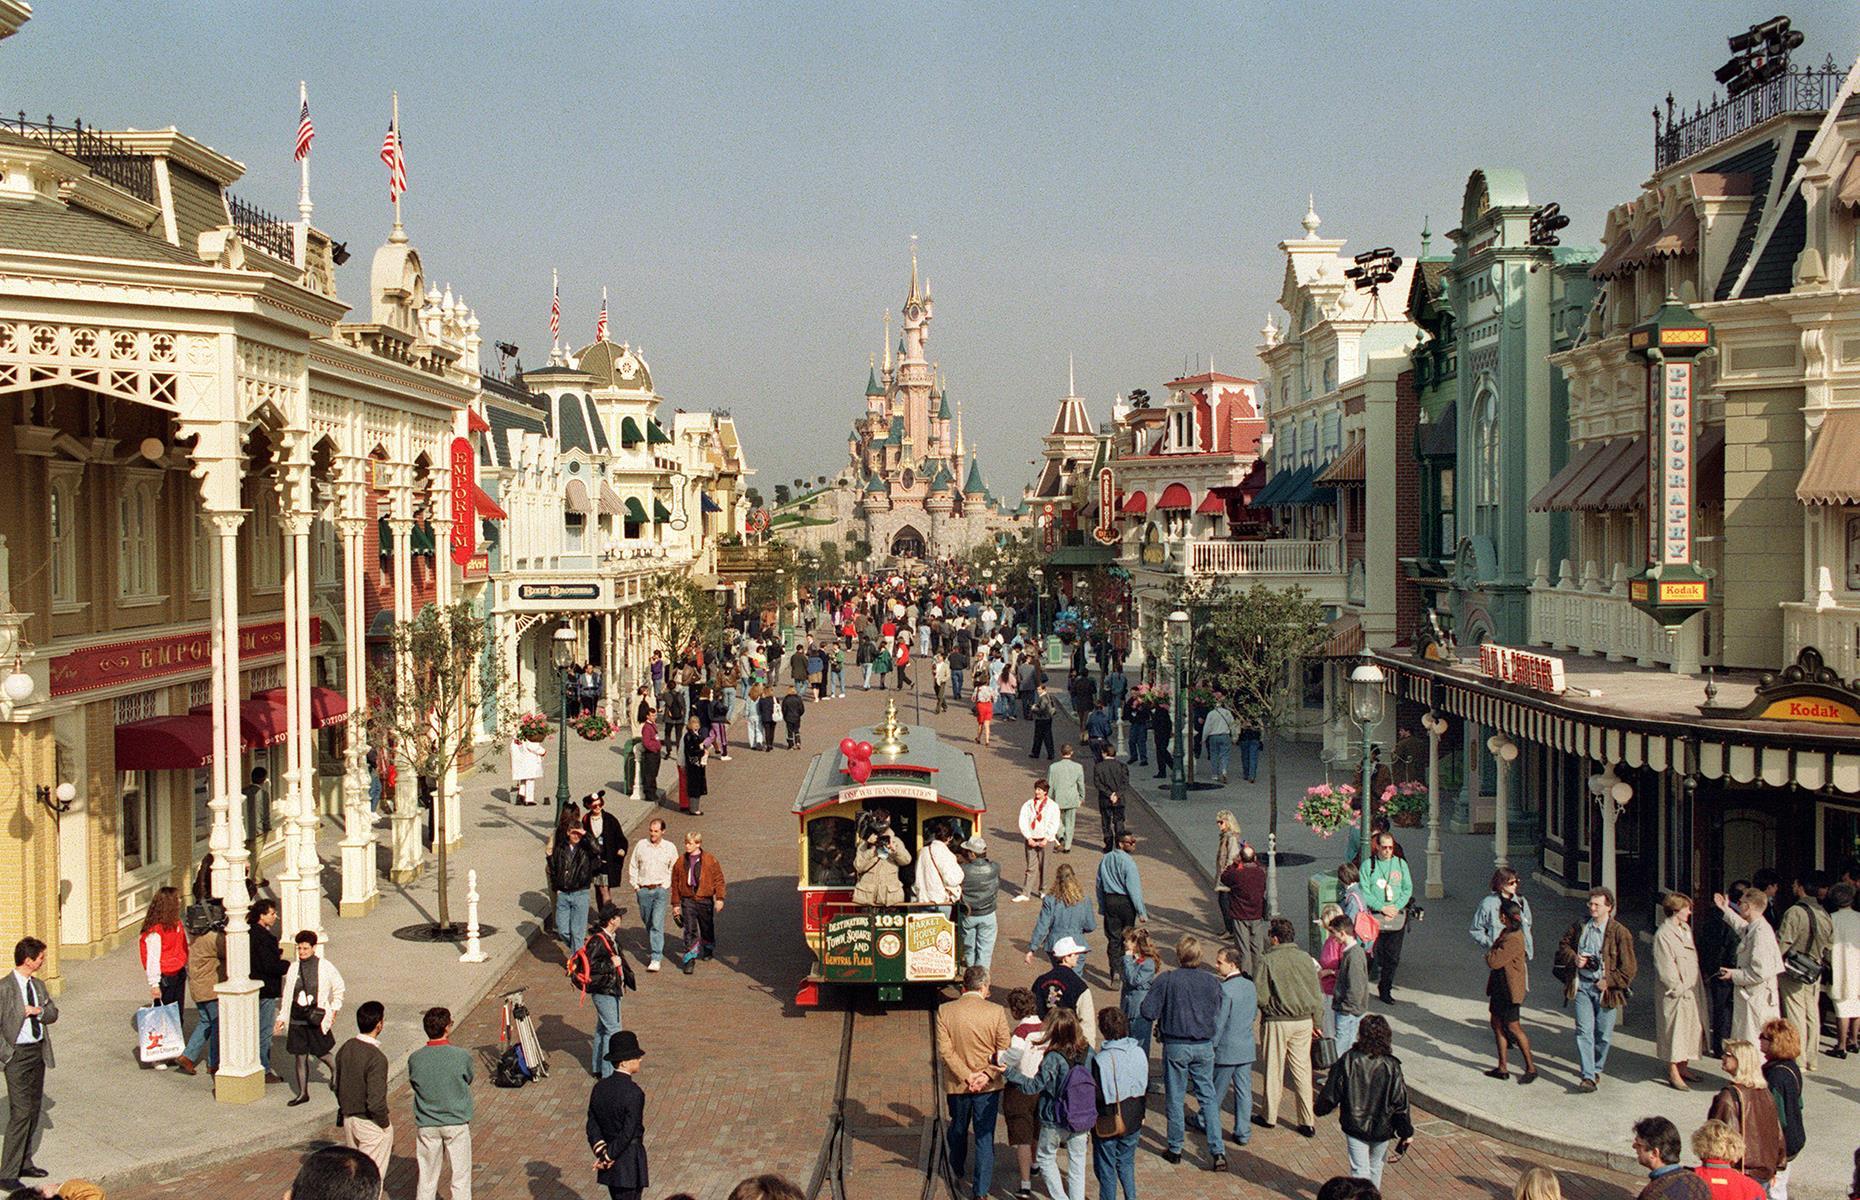 <p>Staying in the French capital, Disneyland Paris – initially called Euro Disney – opened on 12 April 1992 and is pictured here on the press preview the day before. The resort had a rocky first few years, struggling with losses and failing to attract as many visitors as its American counterparts. Yet thanks to advertising campaigns in the early 2000s, by 2005 Disneyland Paris had turned its fortunes around and become the number one tourist destination for Europe, selling more tickets than the Louvre and the Eiffel Tower.</p>